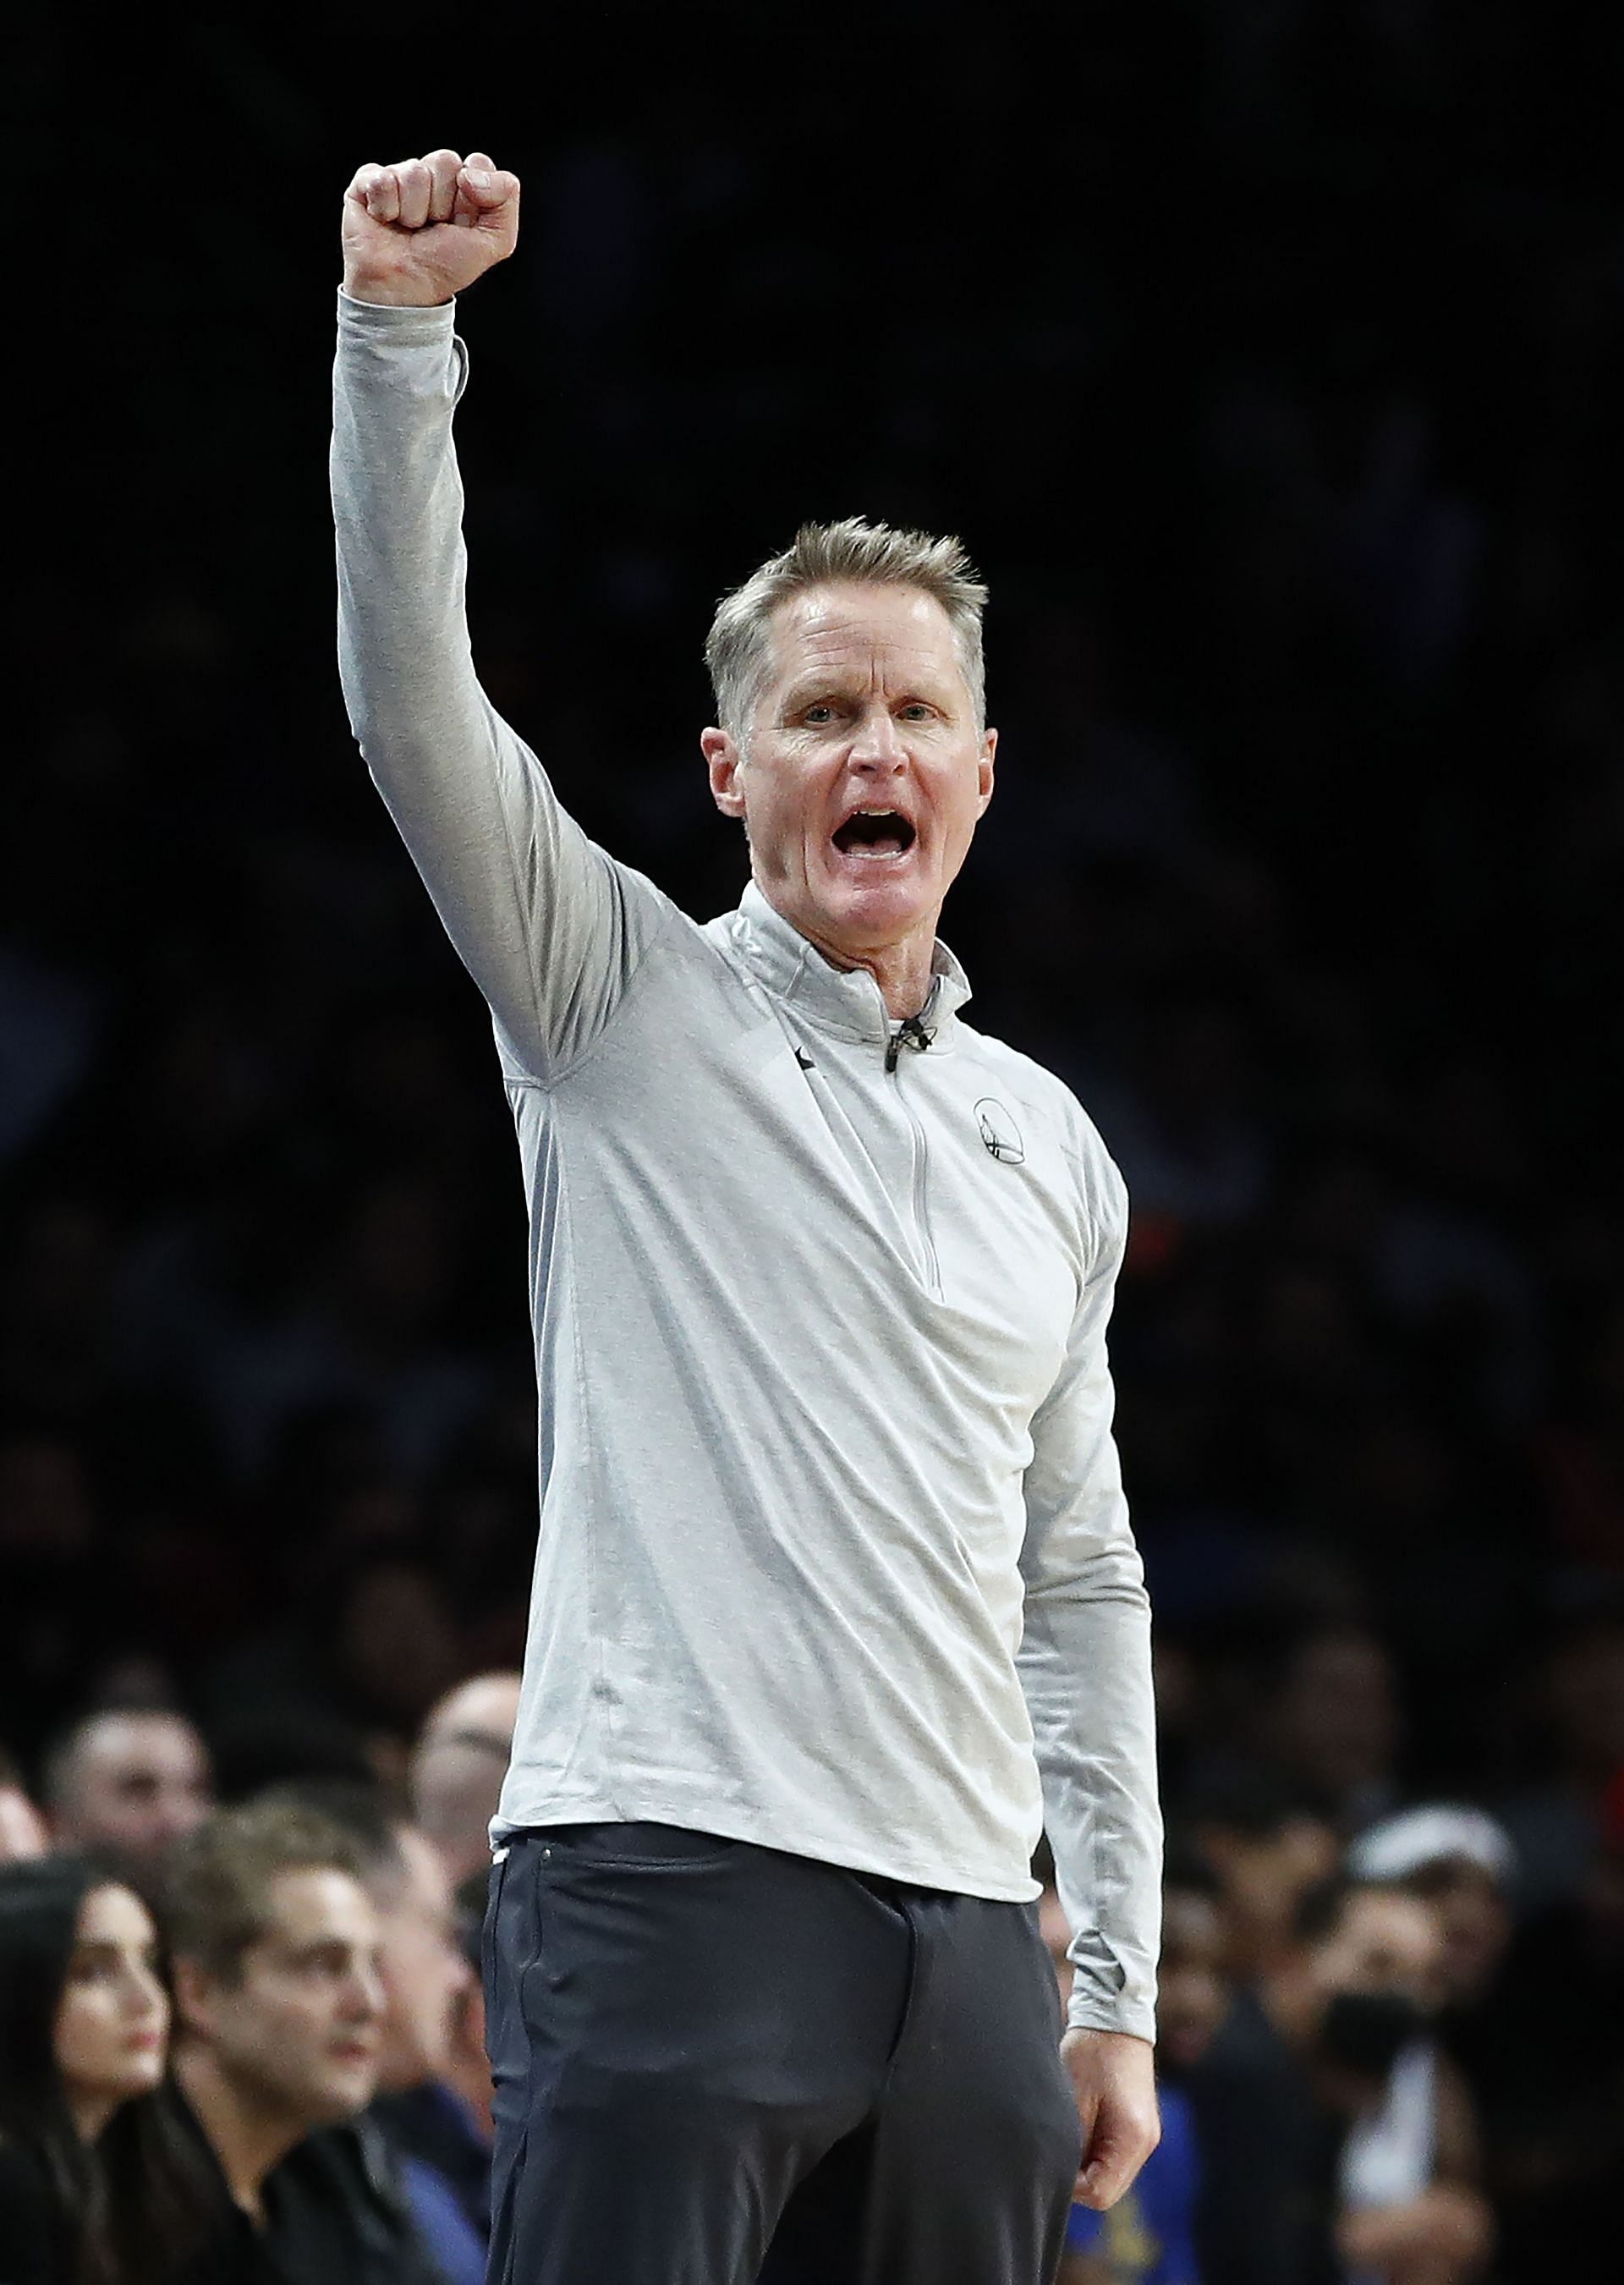 The Golden State Warriors are back on top thanks in part to Steve Kerr